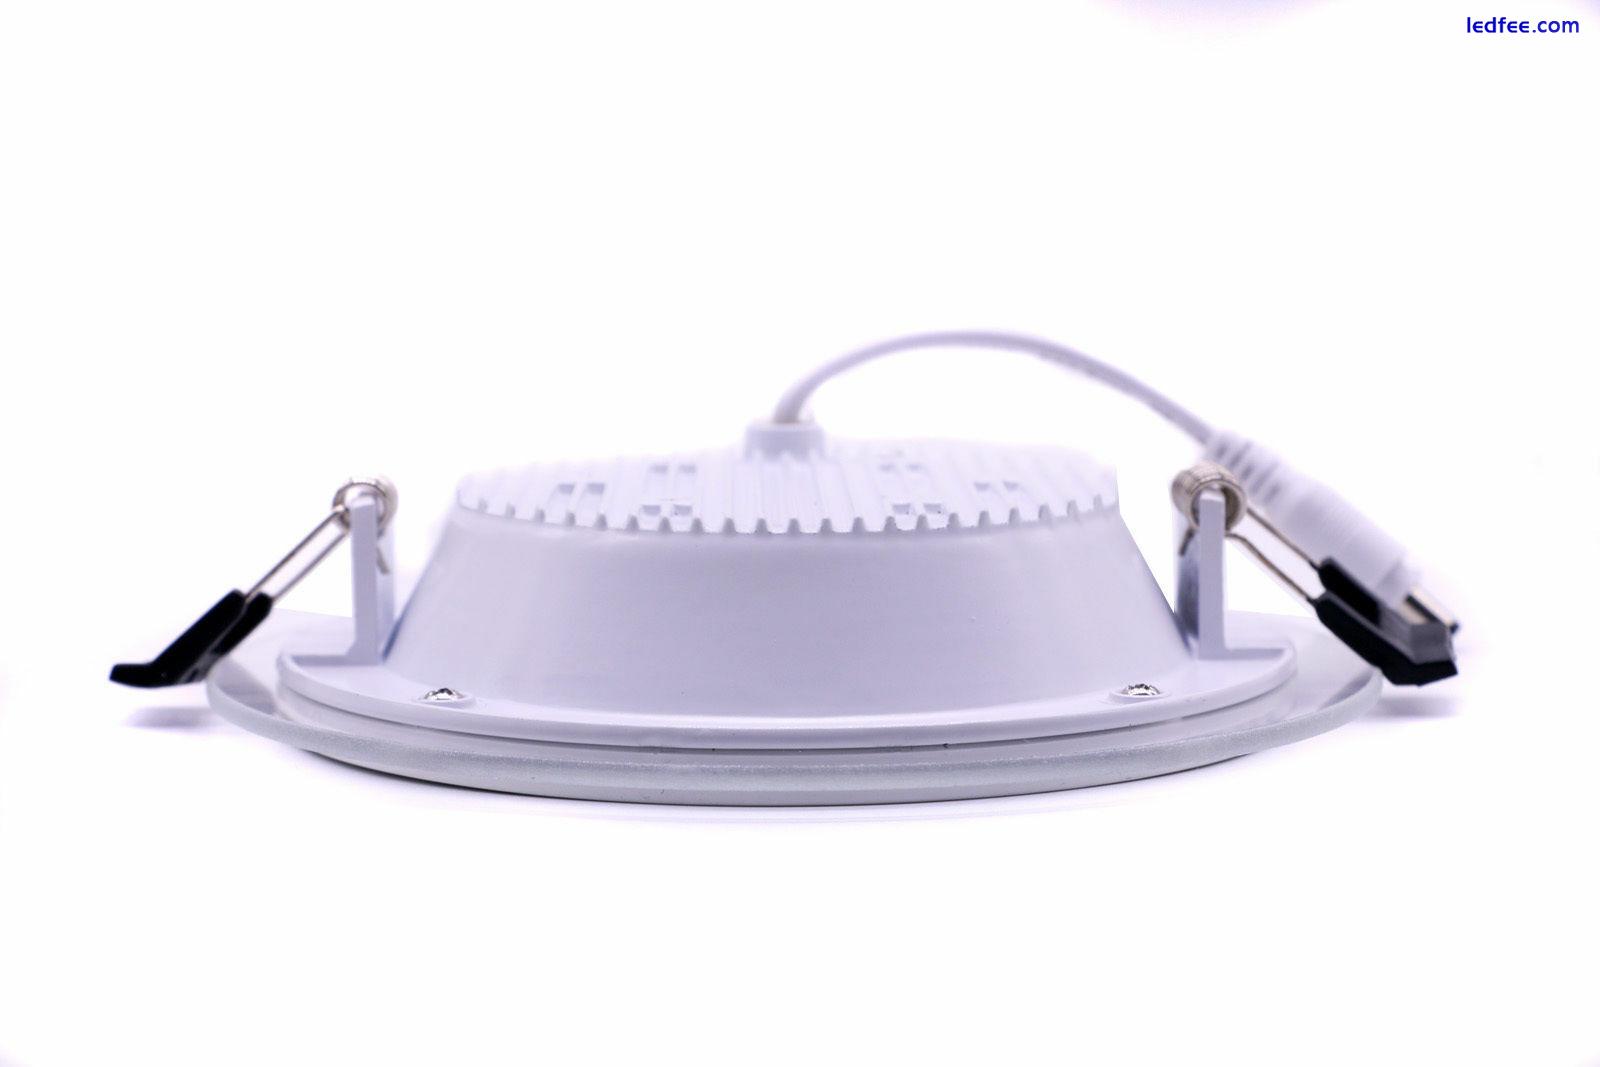 Hot 6W 9W 12W 18W LED Glass Recessed Ceiling Panel Light Downlight Square Round 1 